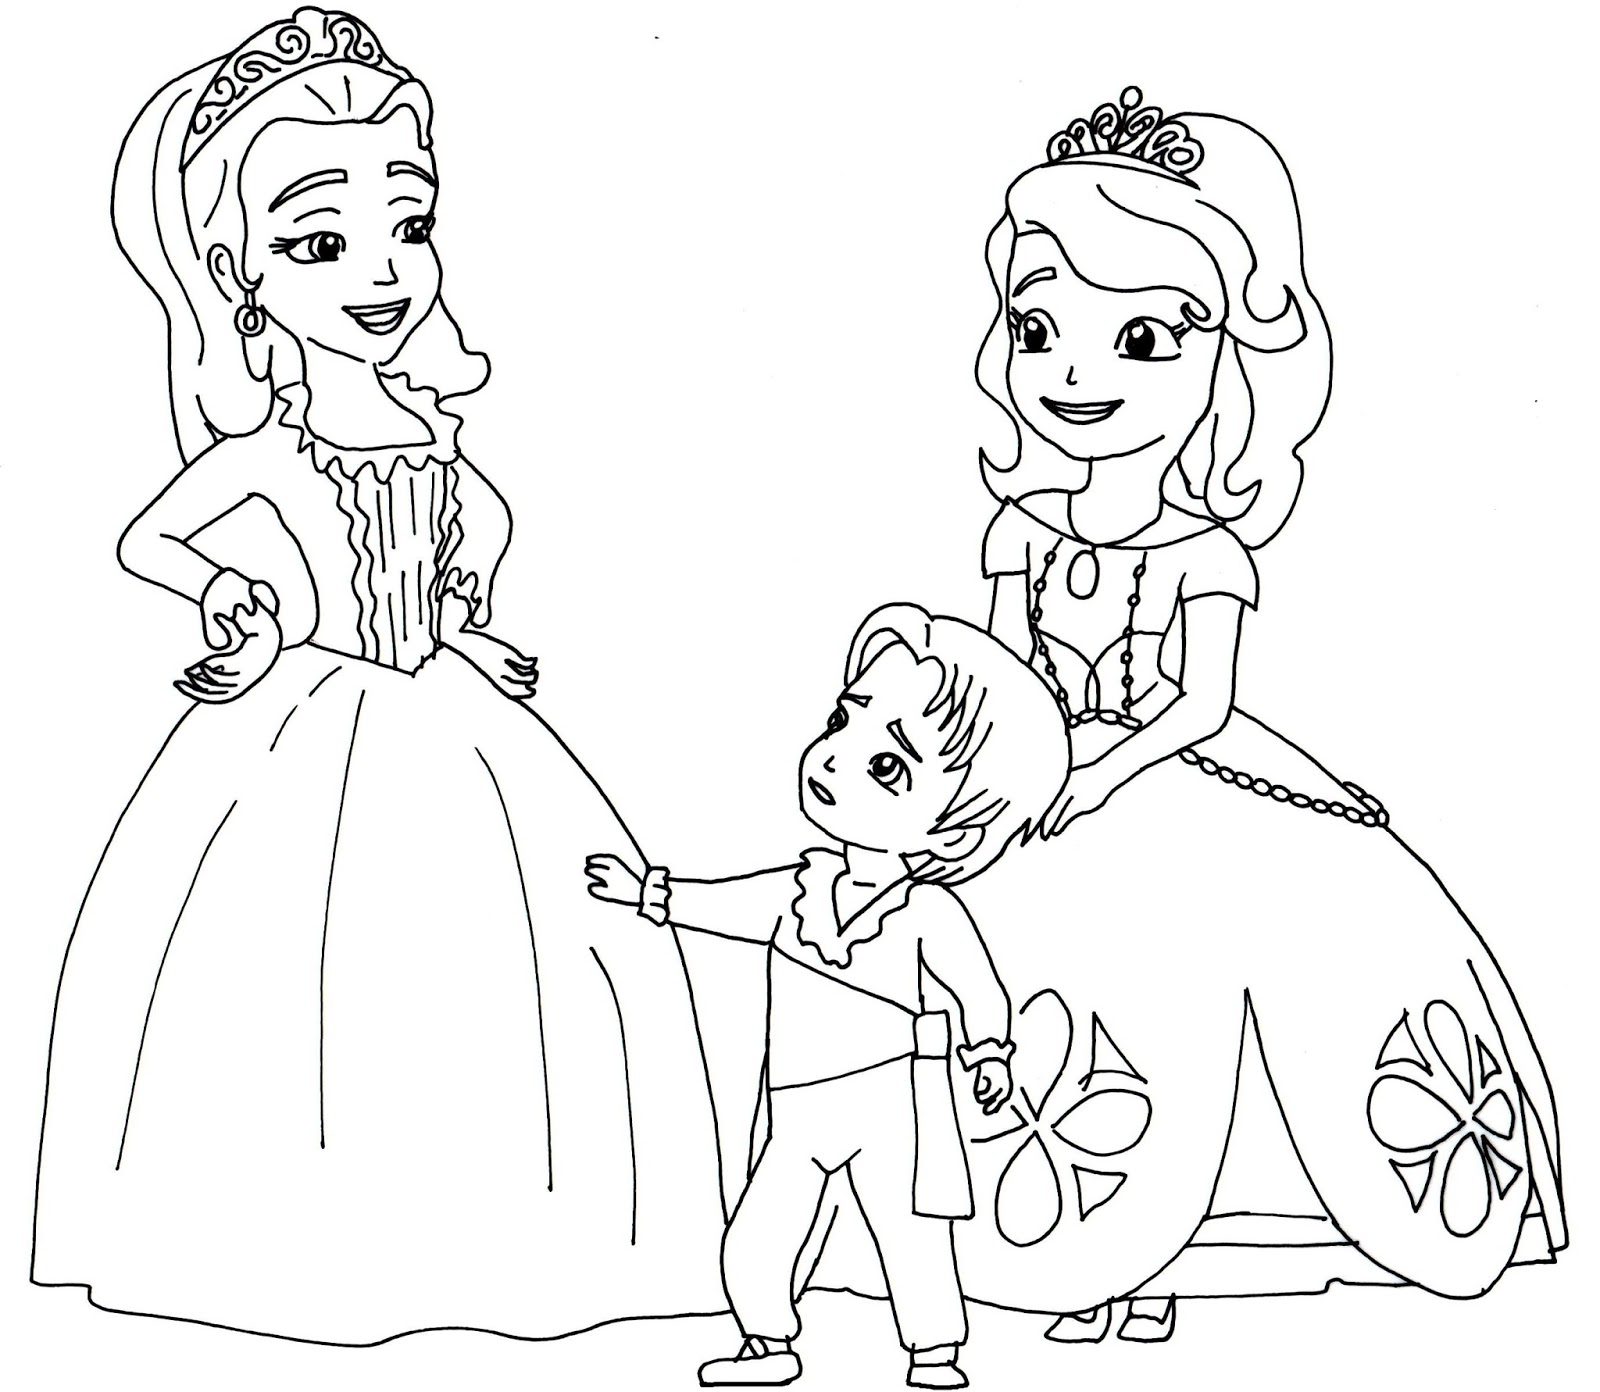 Sofia The First Coloring Pages: Two Princesses and a Baby - Sofia the First Coloring  Page